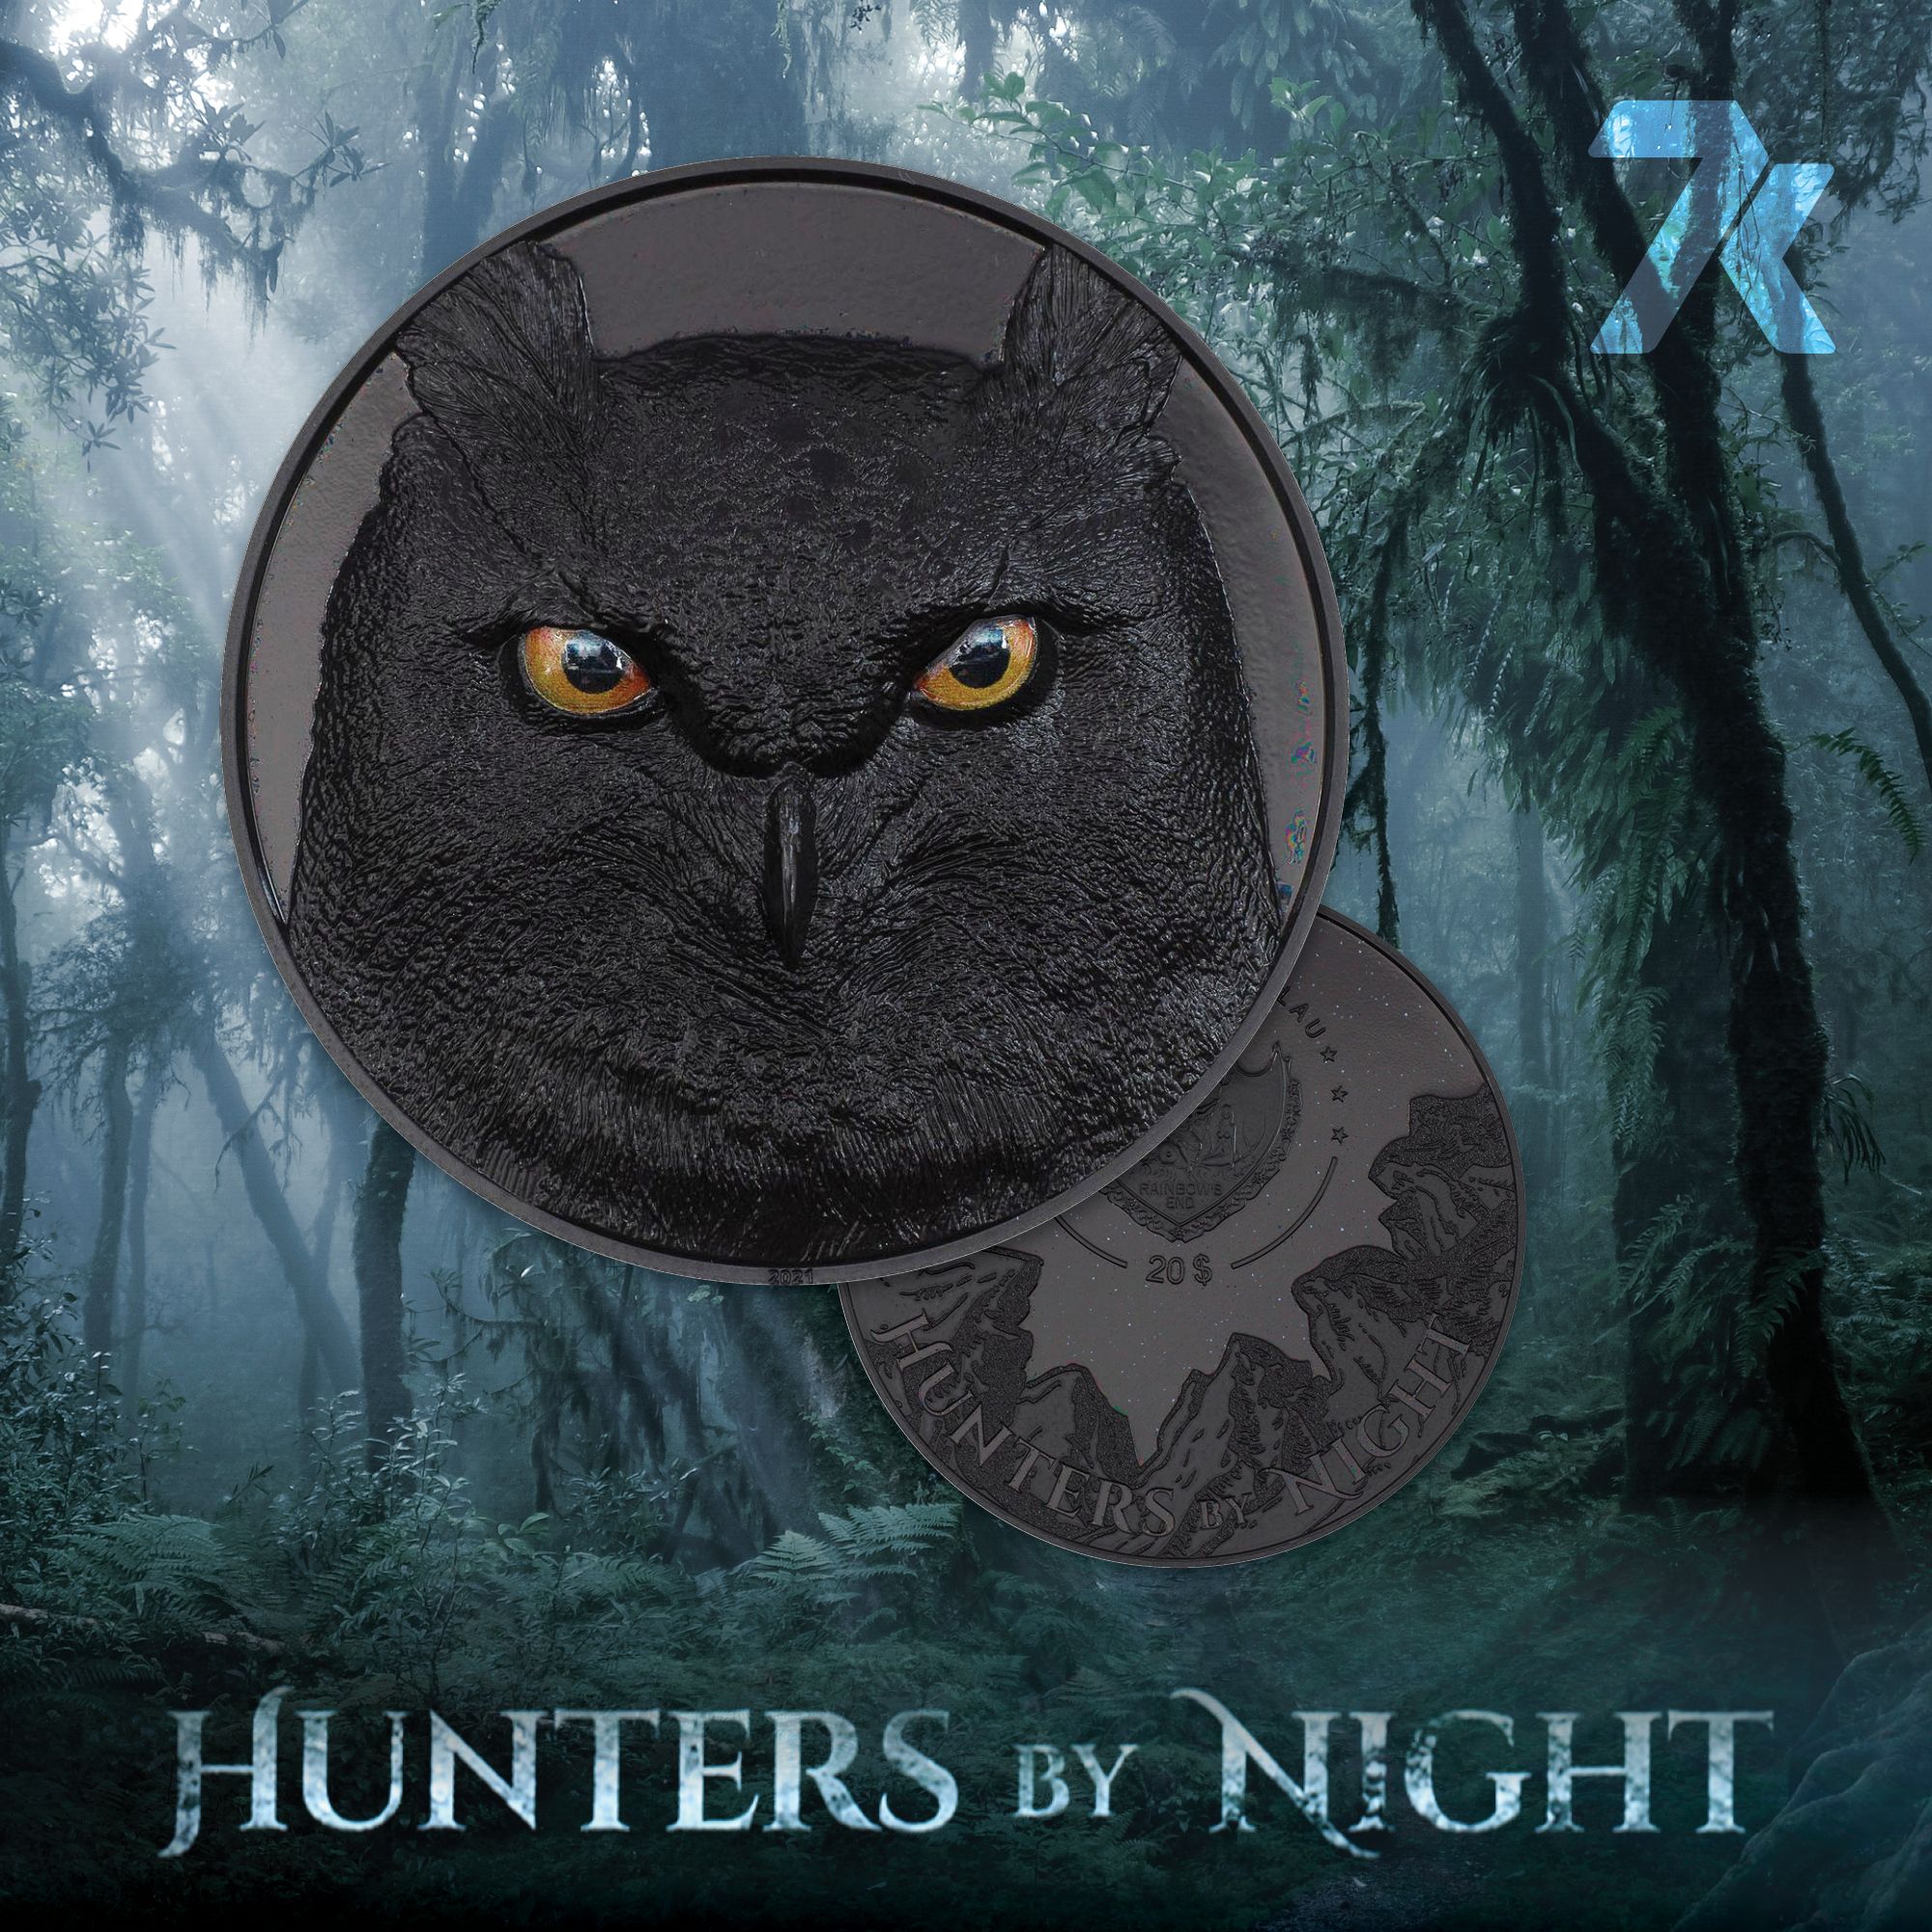 2021 Hunters by Night Eagle Owl 5 oz Silver Coin